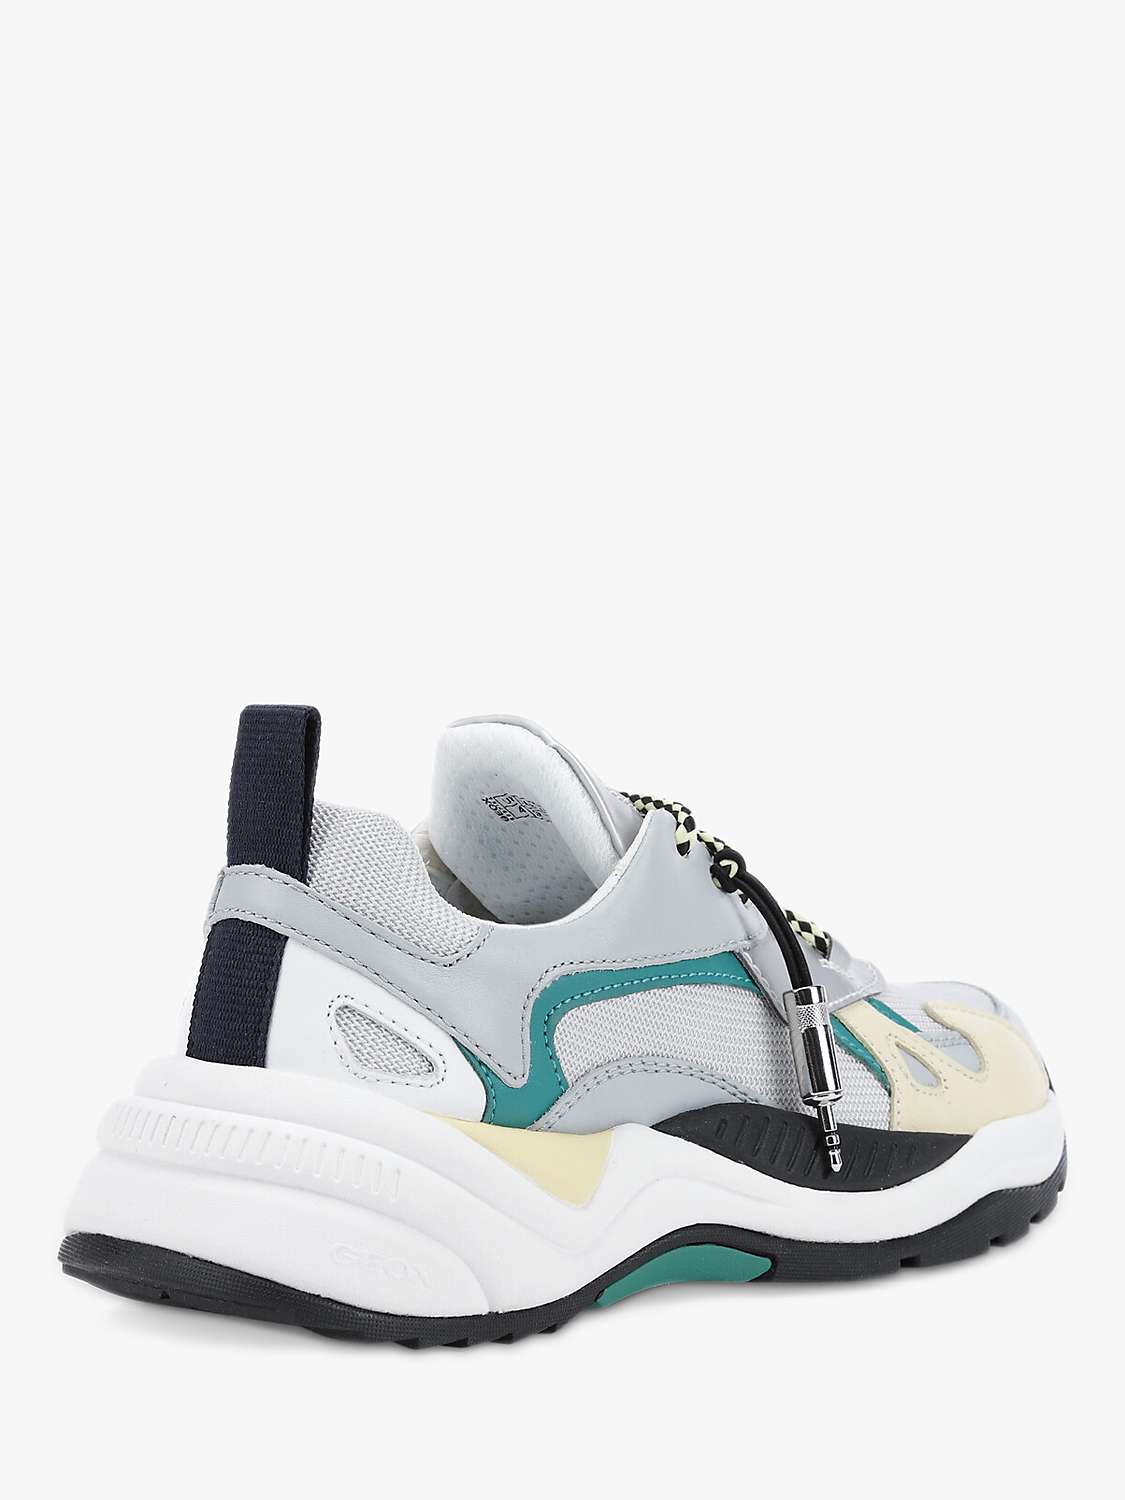 Buy Geox Women's T02 Phonica Trainers Online at johnlewis.com